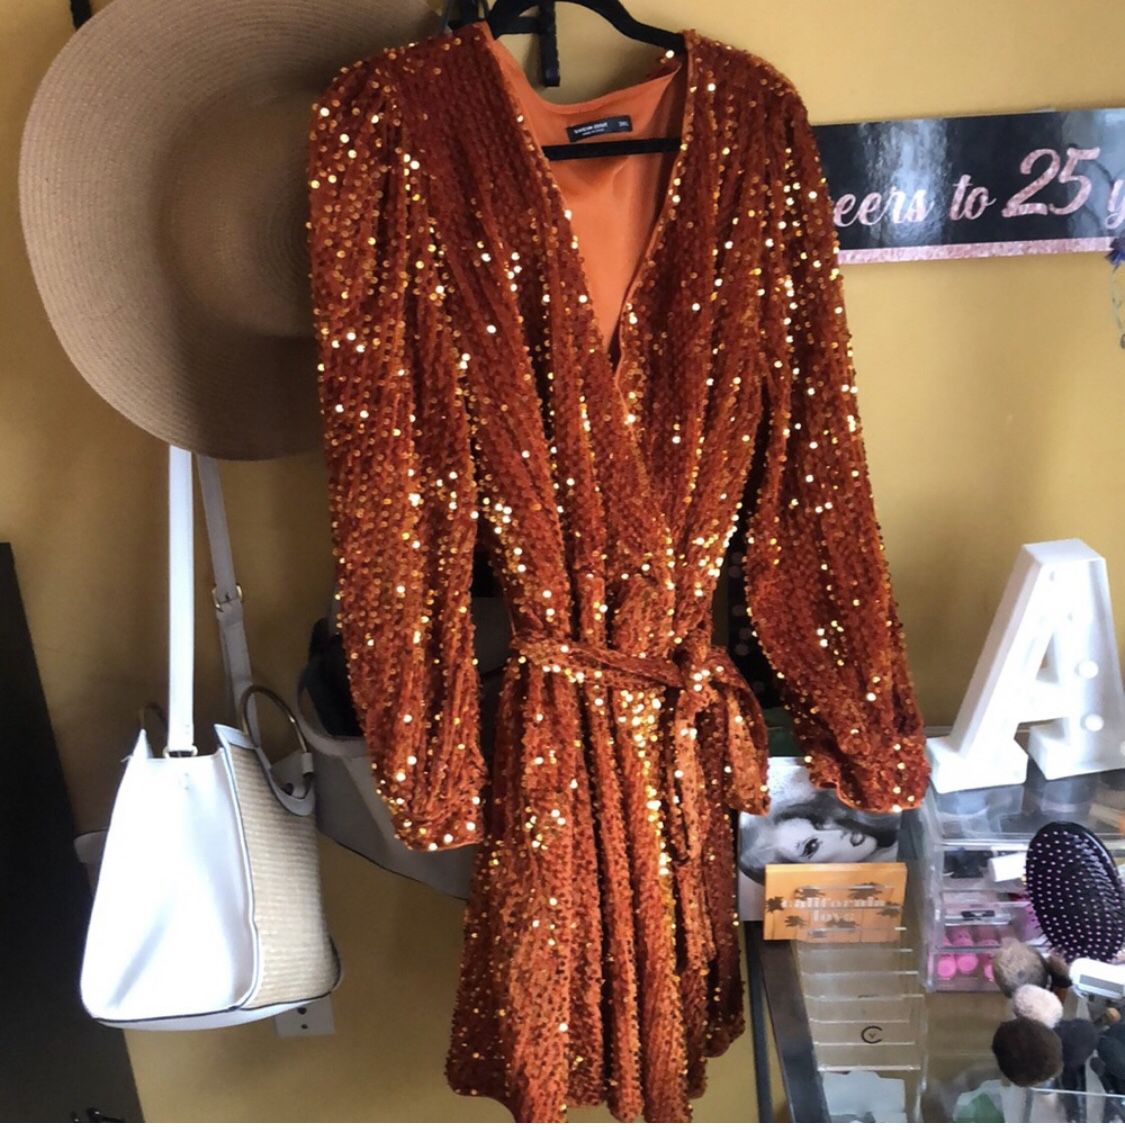 Shein curve sequin v neck long sleeve orange dress… fit and flare…very flattering and accentuates the curves… fits like a 2 xl..price $25…Only wore on